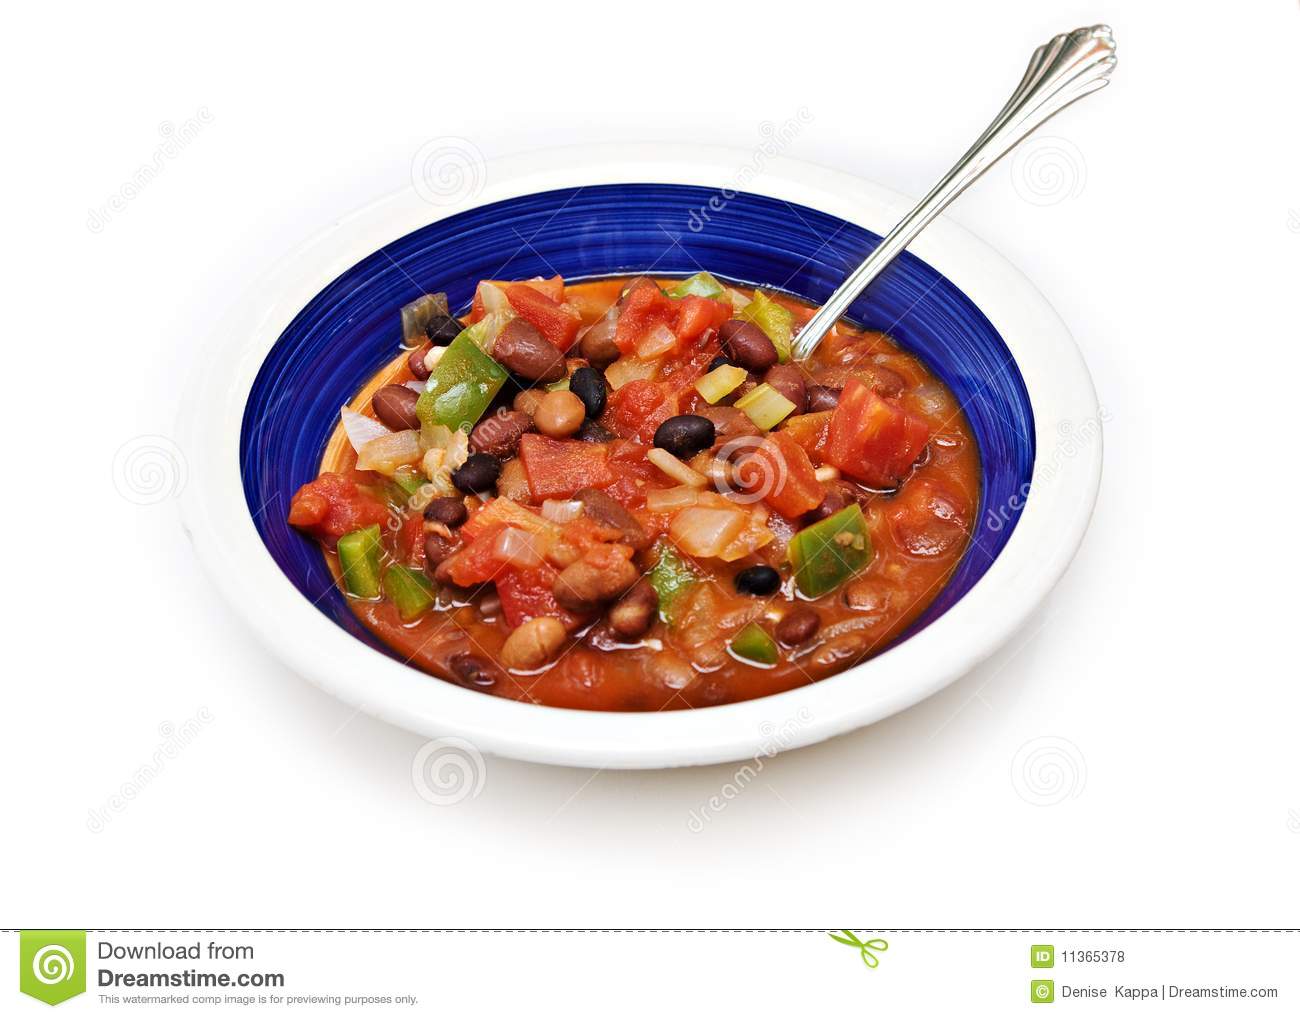 Bowl Of Chili With Beans Royalty Free Stock Photos   Image  11365378